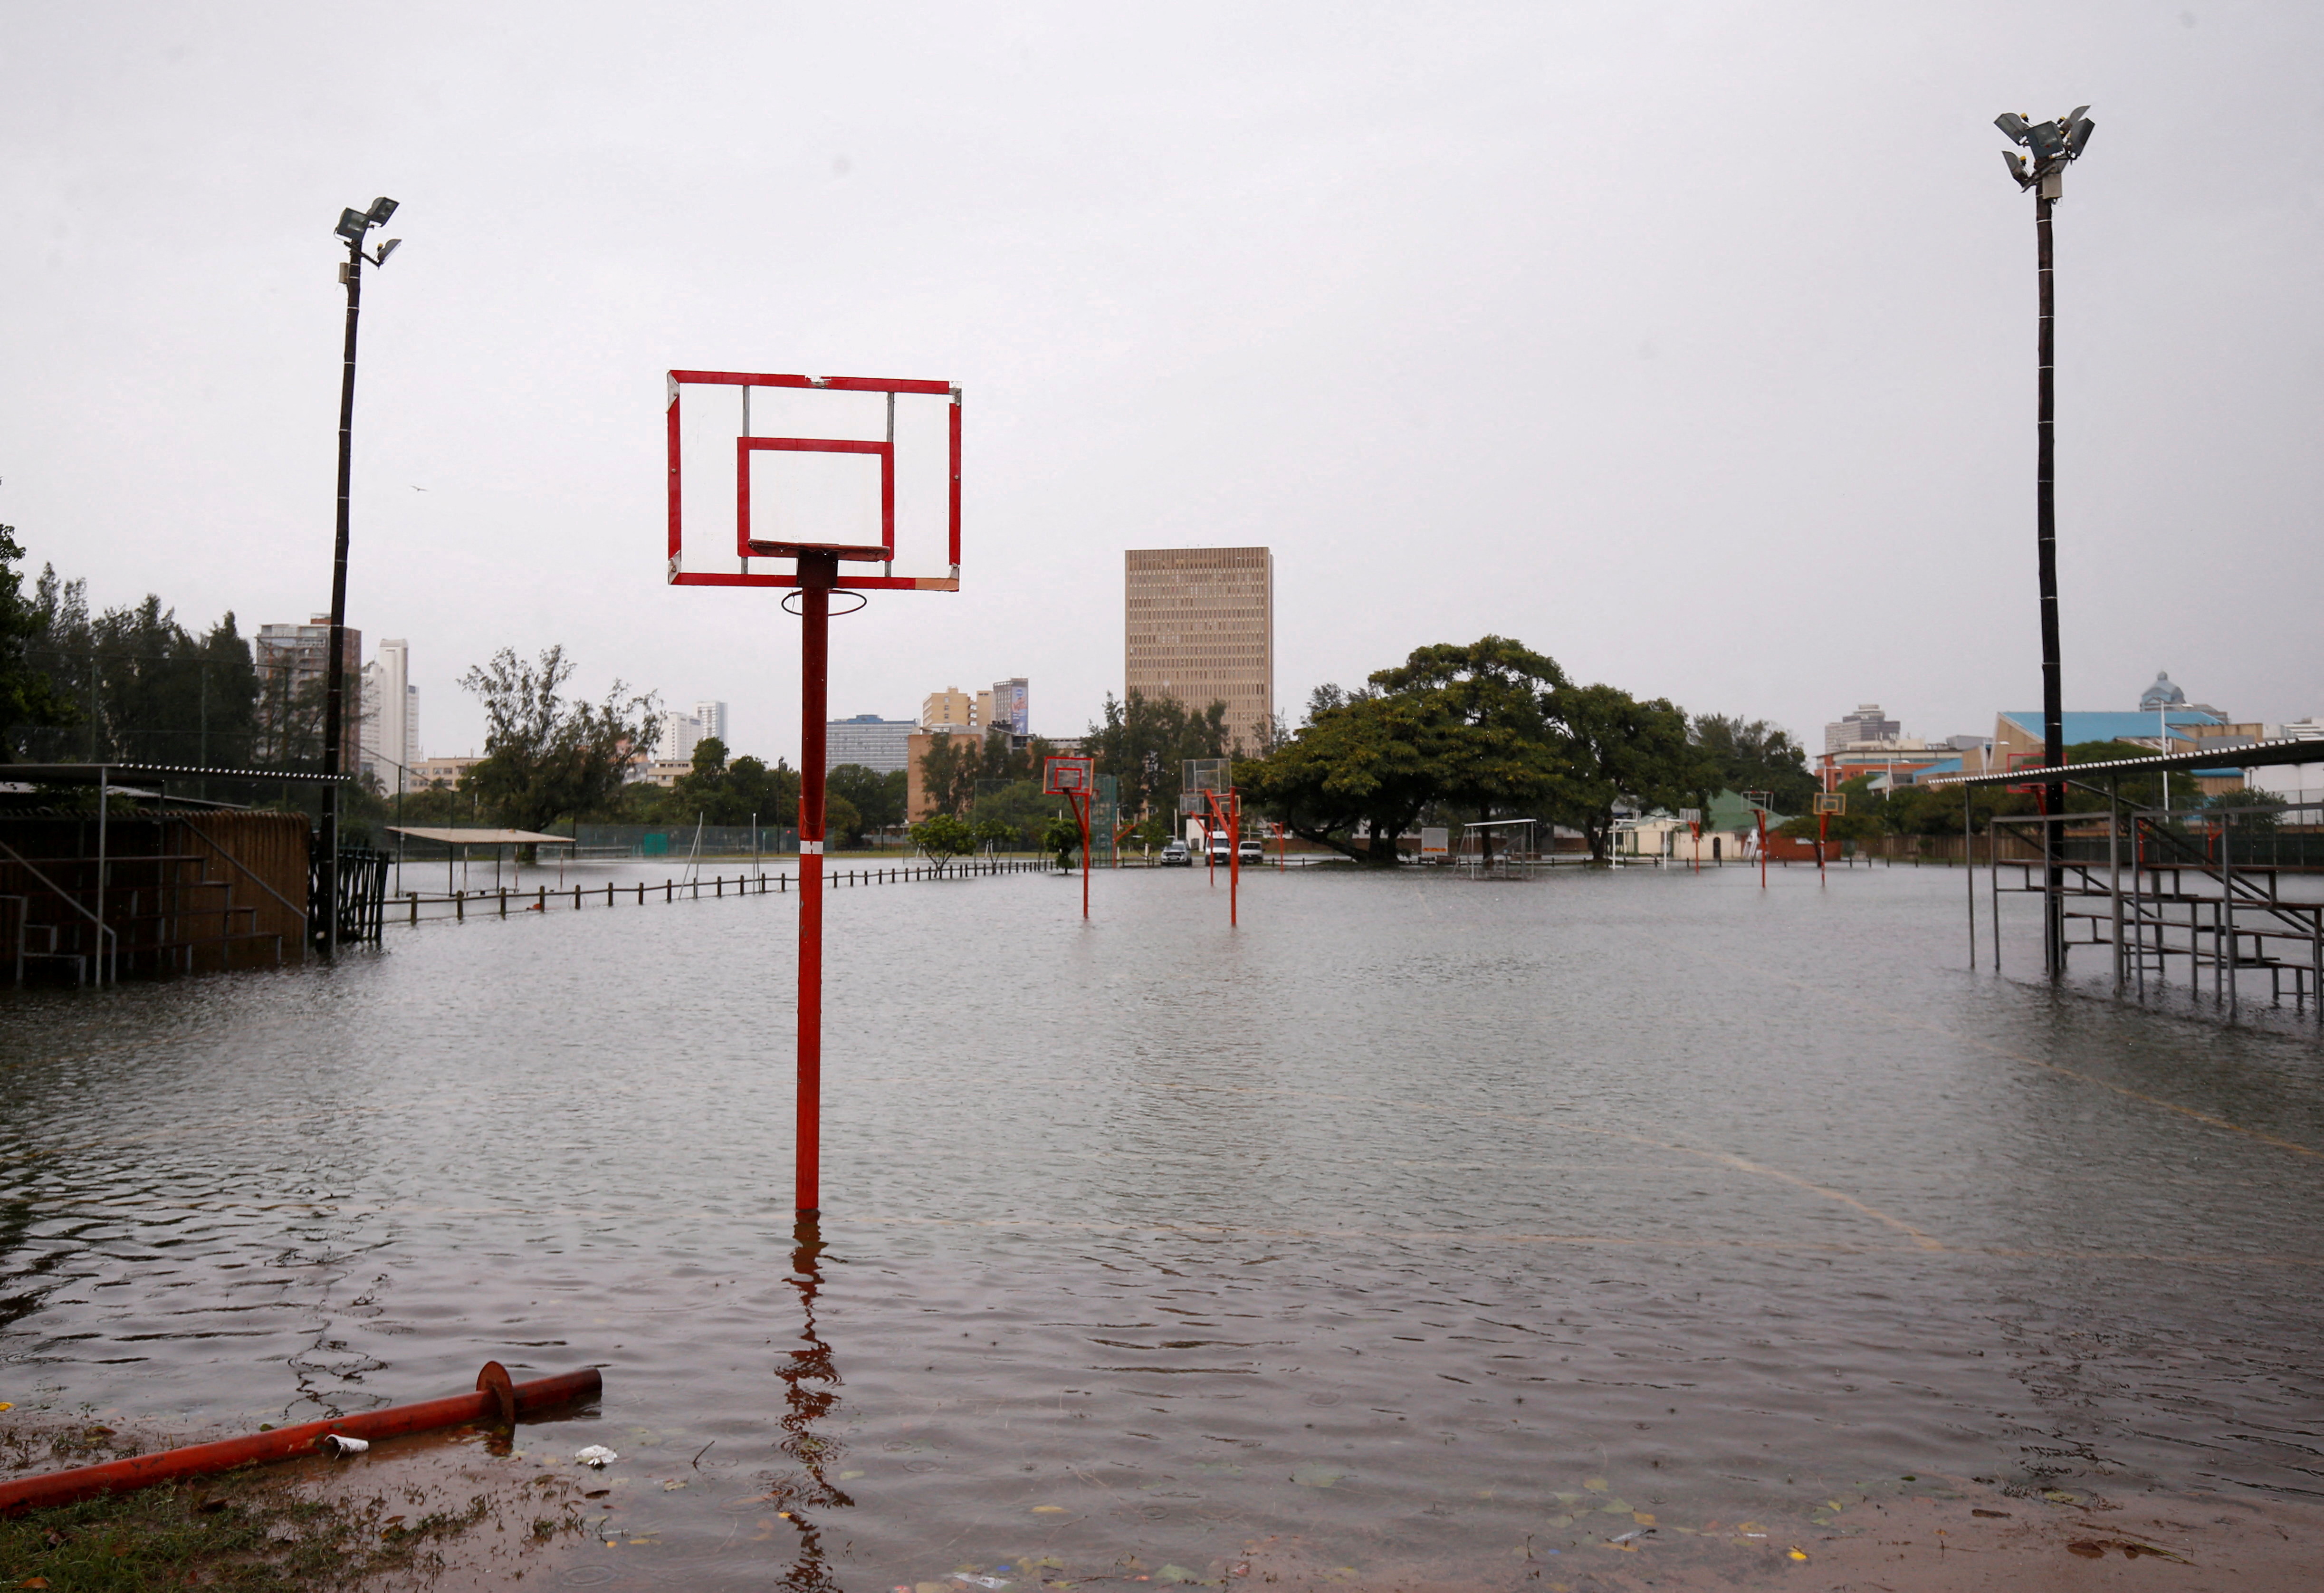 Waterlogged basketball courts are pictured after heavy rains in Durban